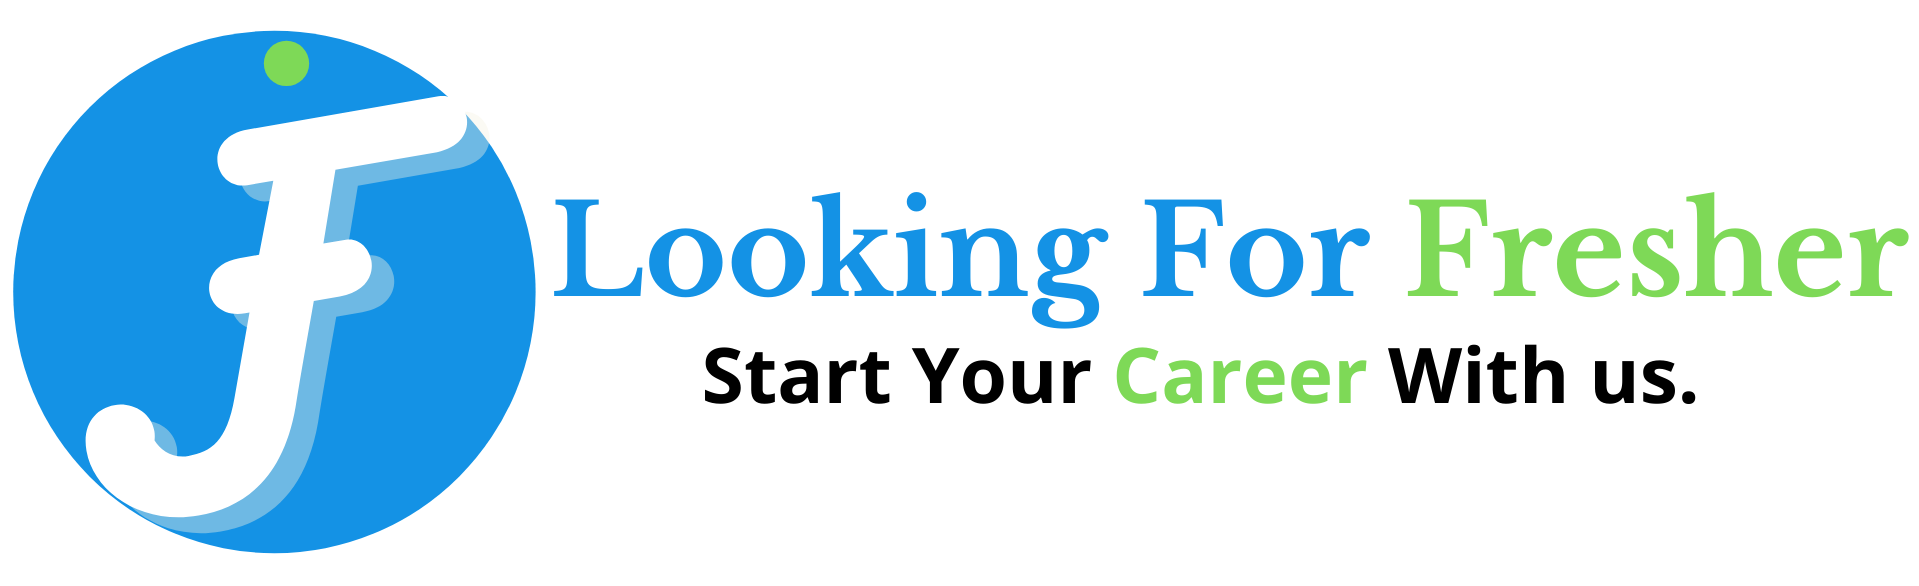 Looking For Fresher: Job portal dedicated to fresher's jobs